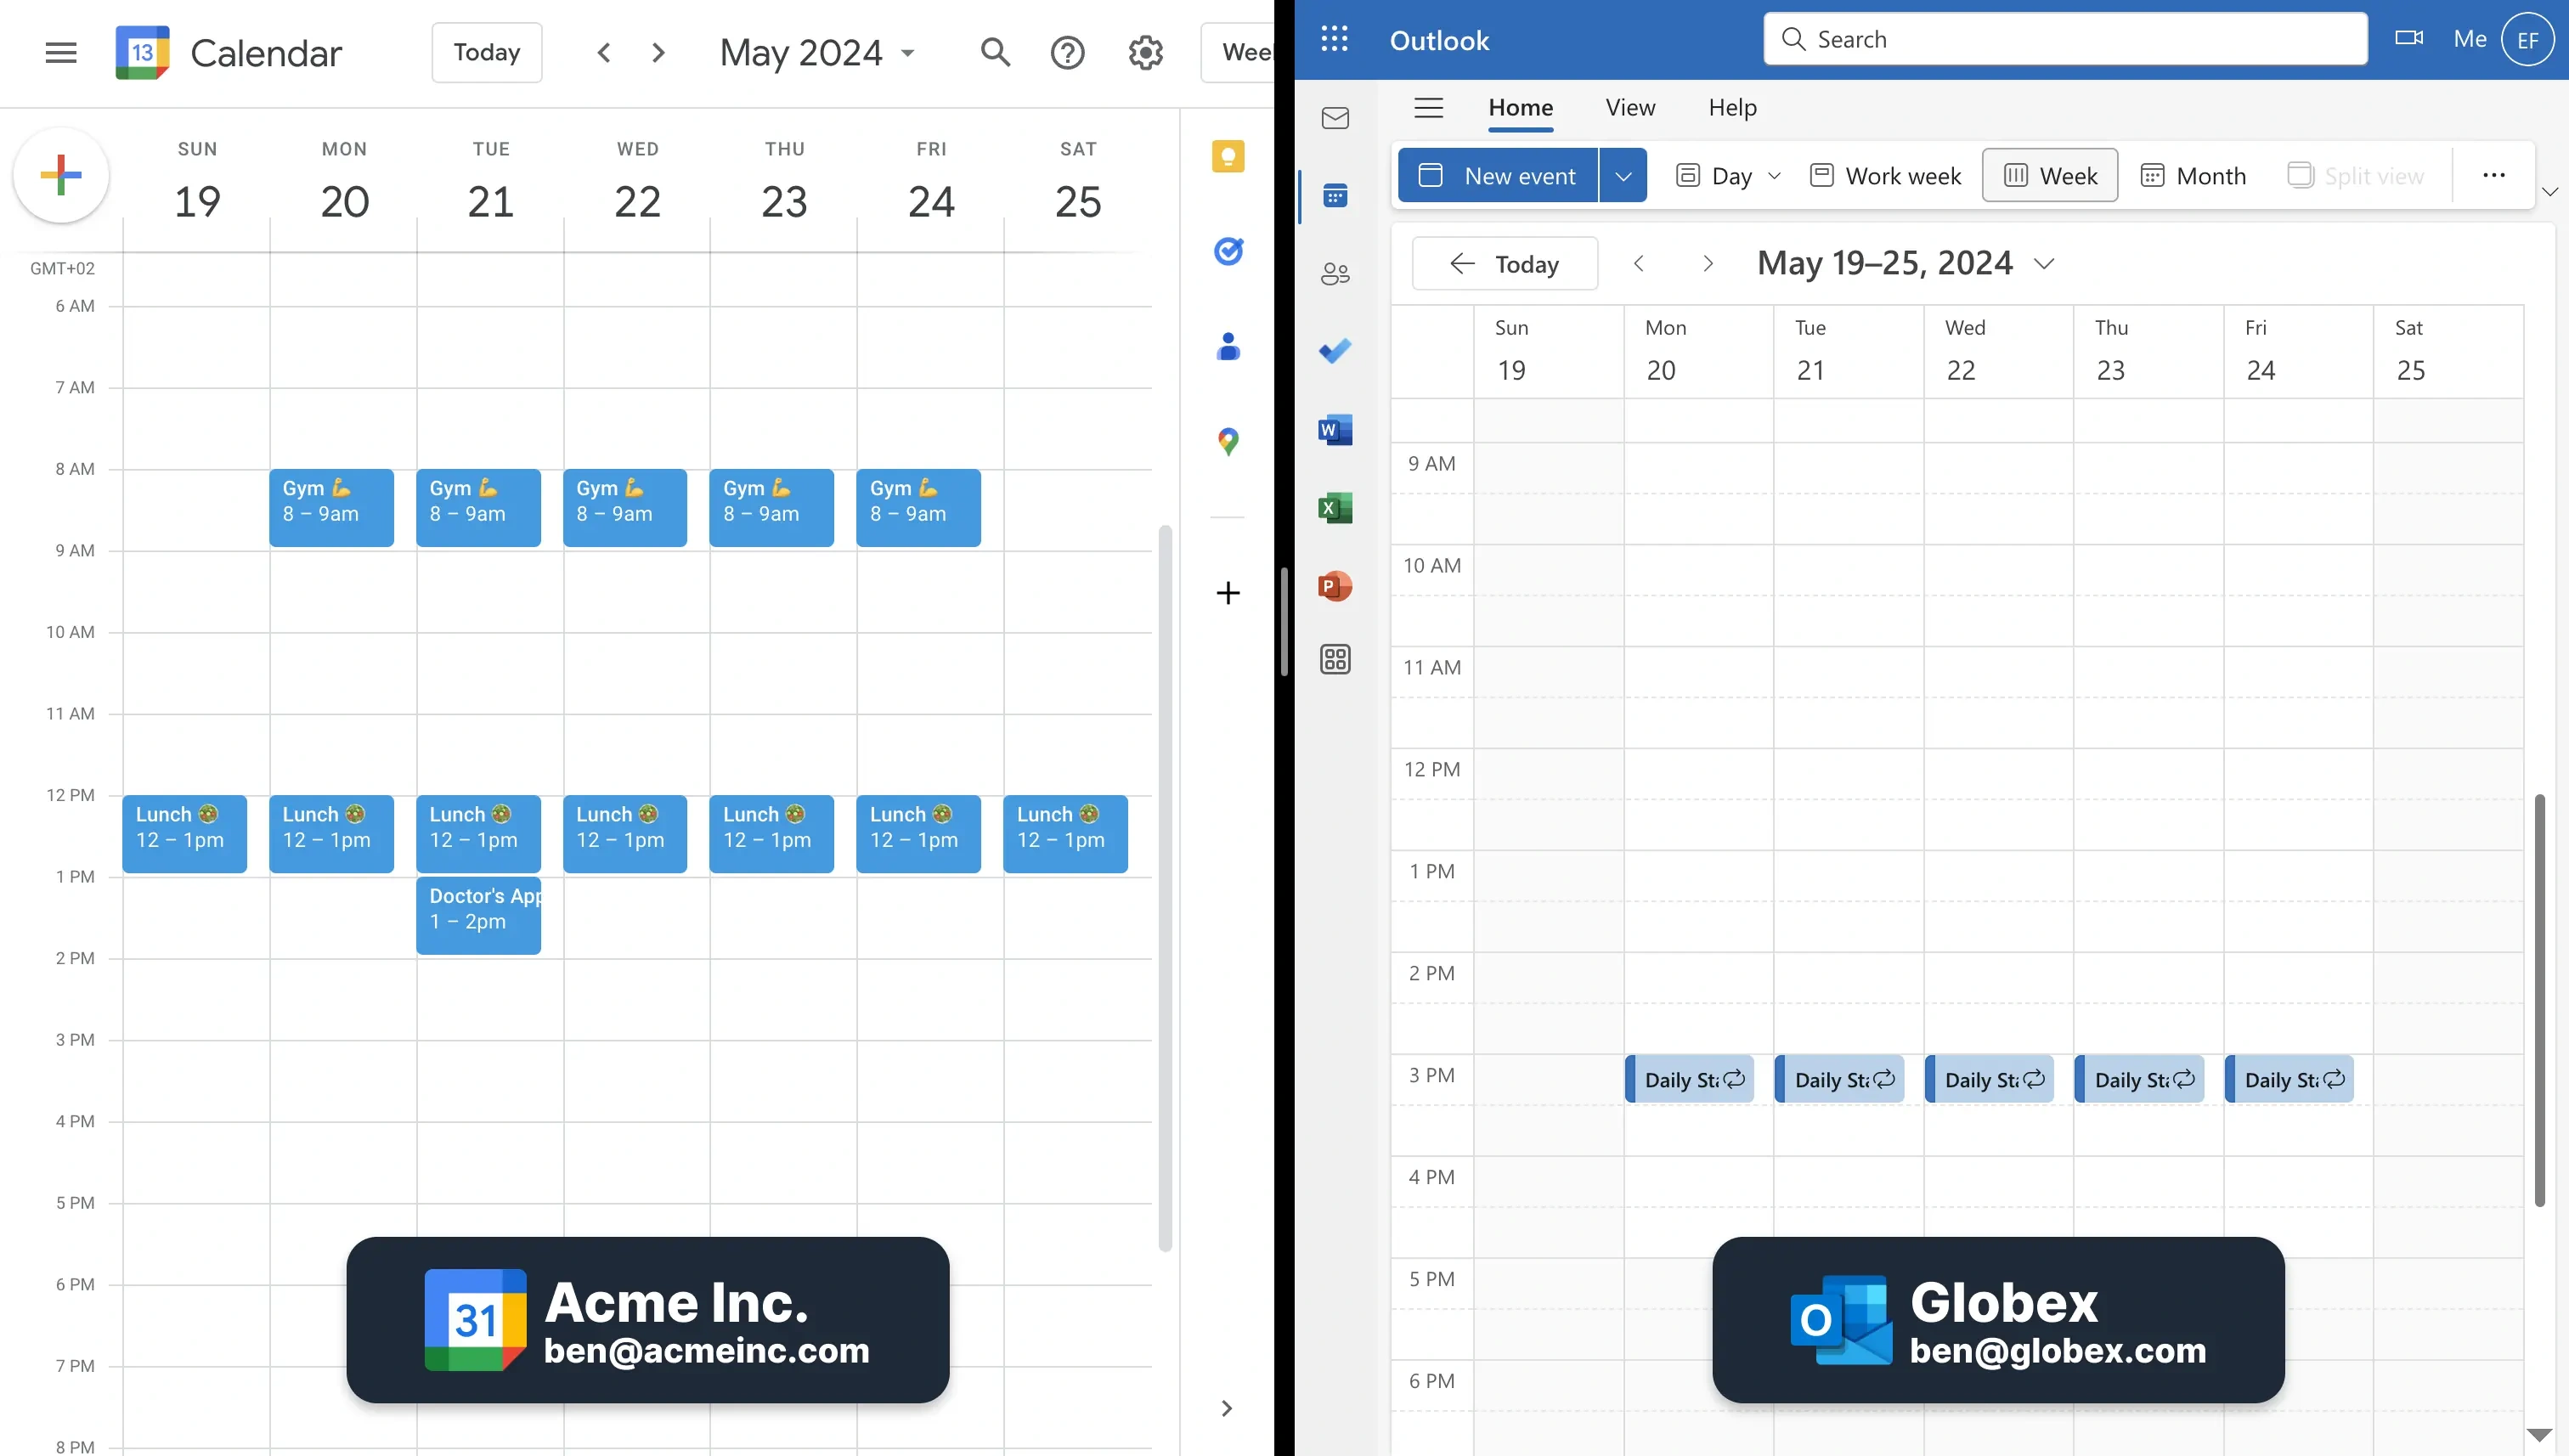 Managing Outlook and Google Calendar - Side by side